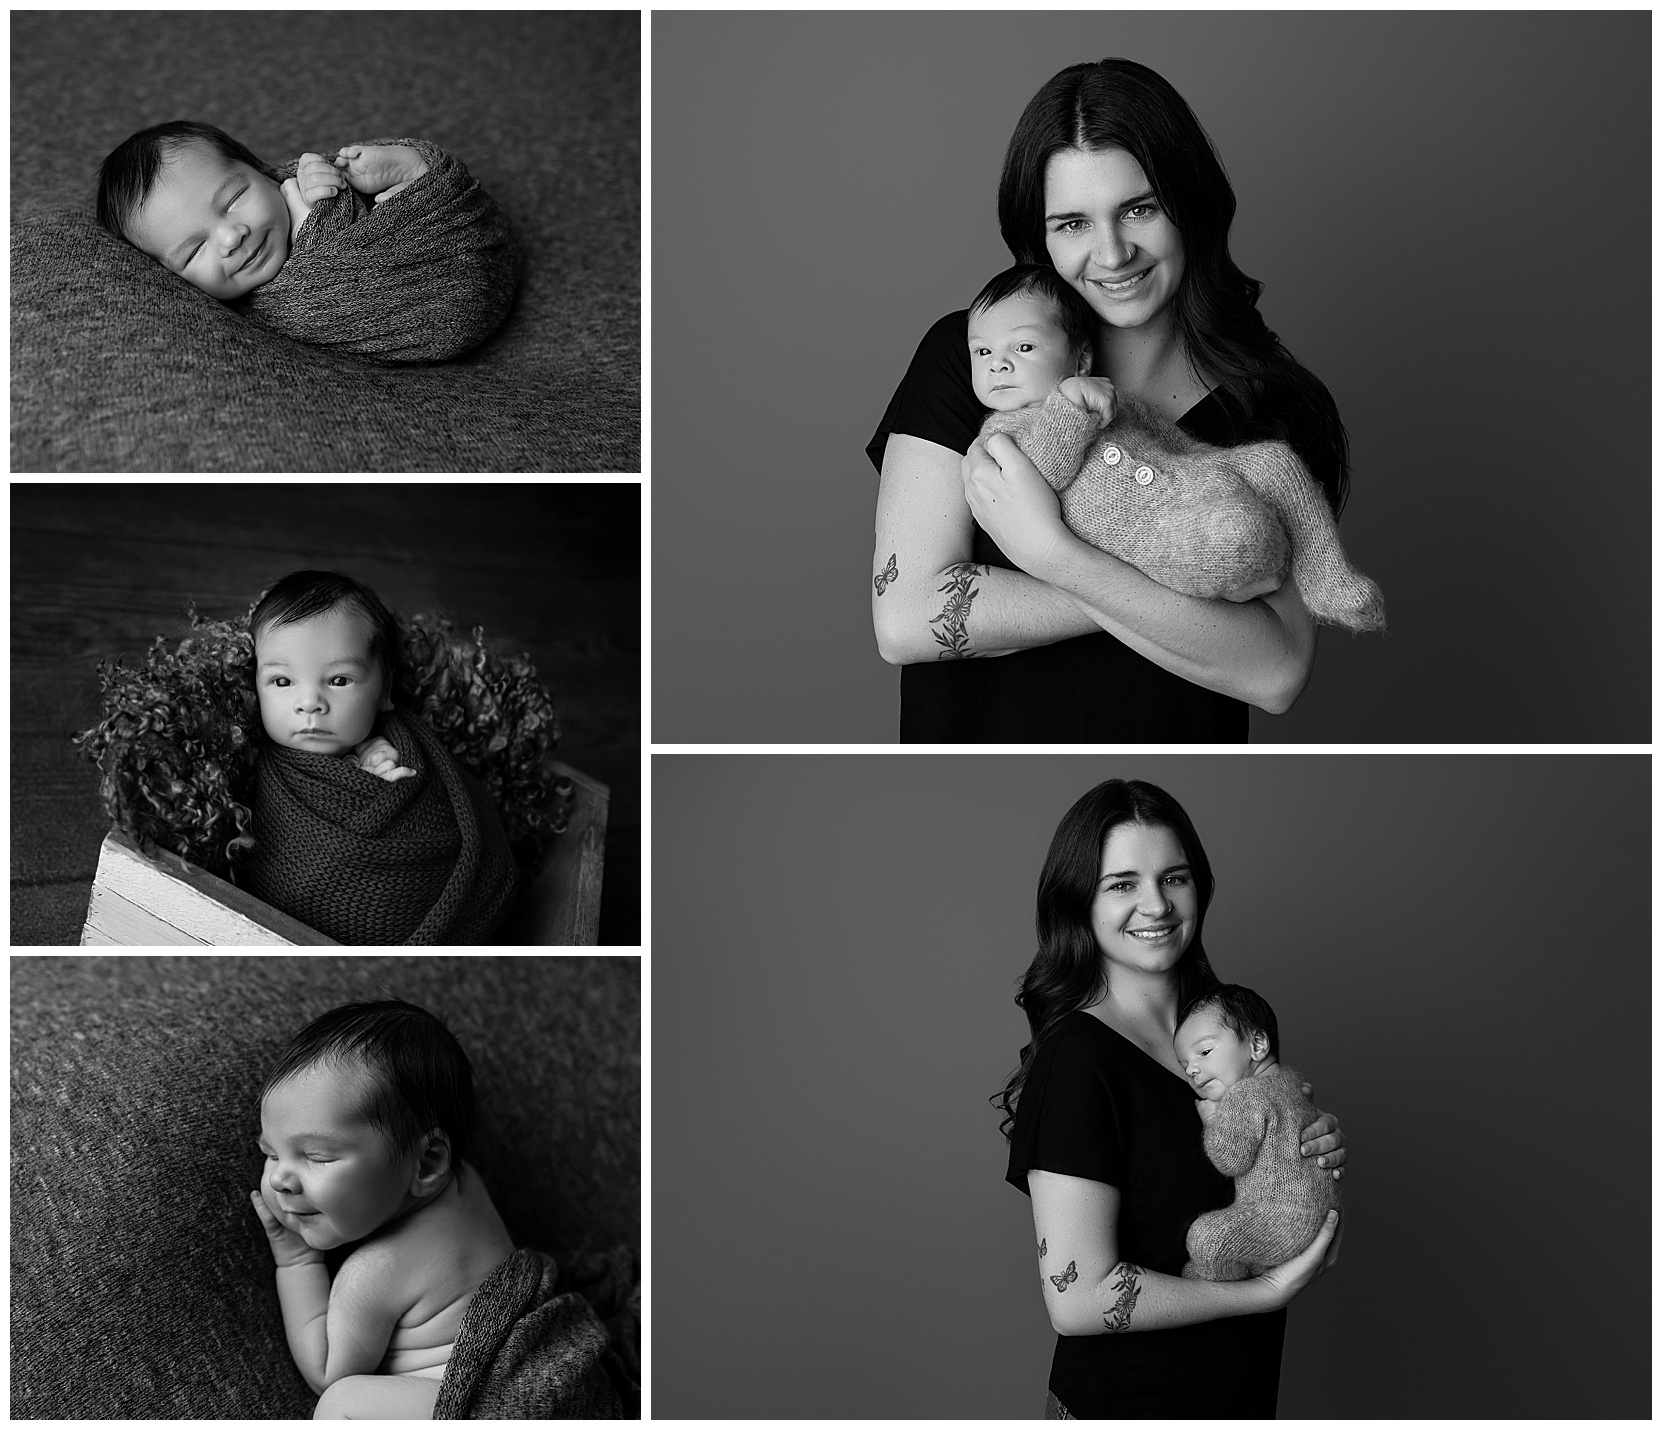 Black and white photo montage featuring photos of a newborn swaddled in a knit blanket on the left and photos of mom holding a newborn on the right.